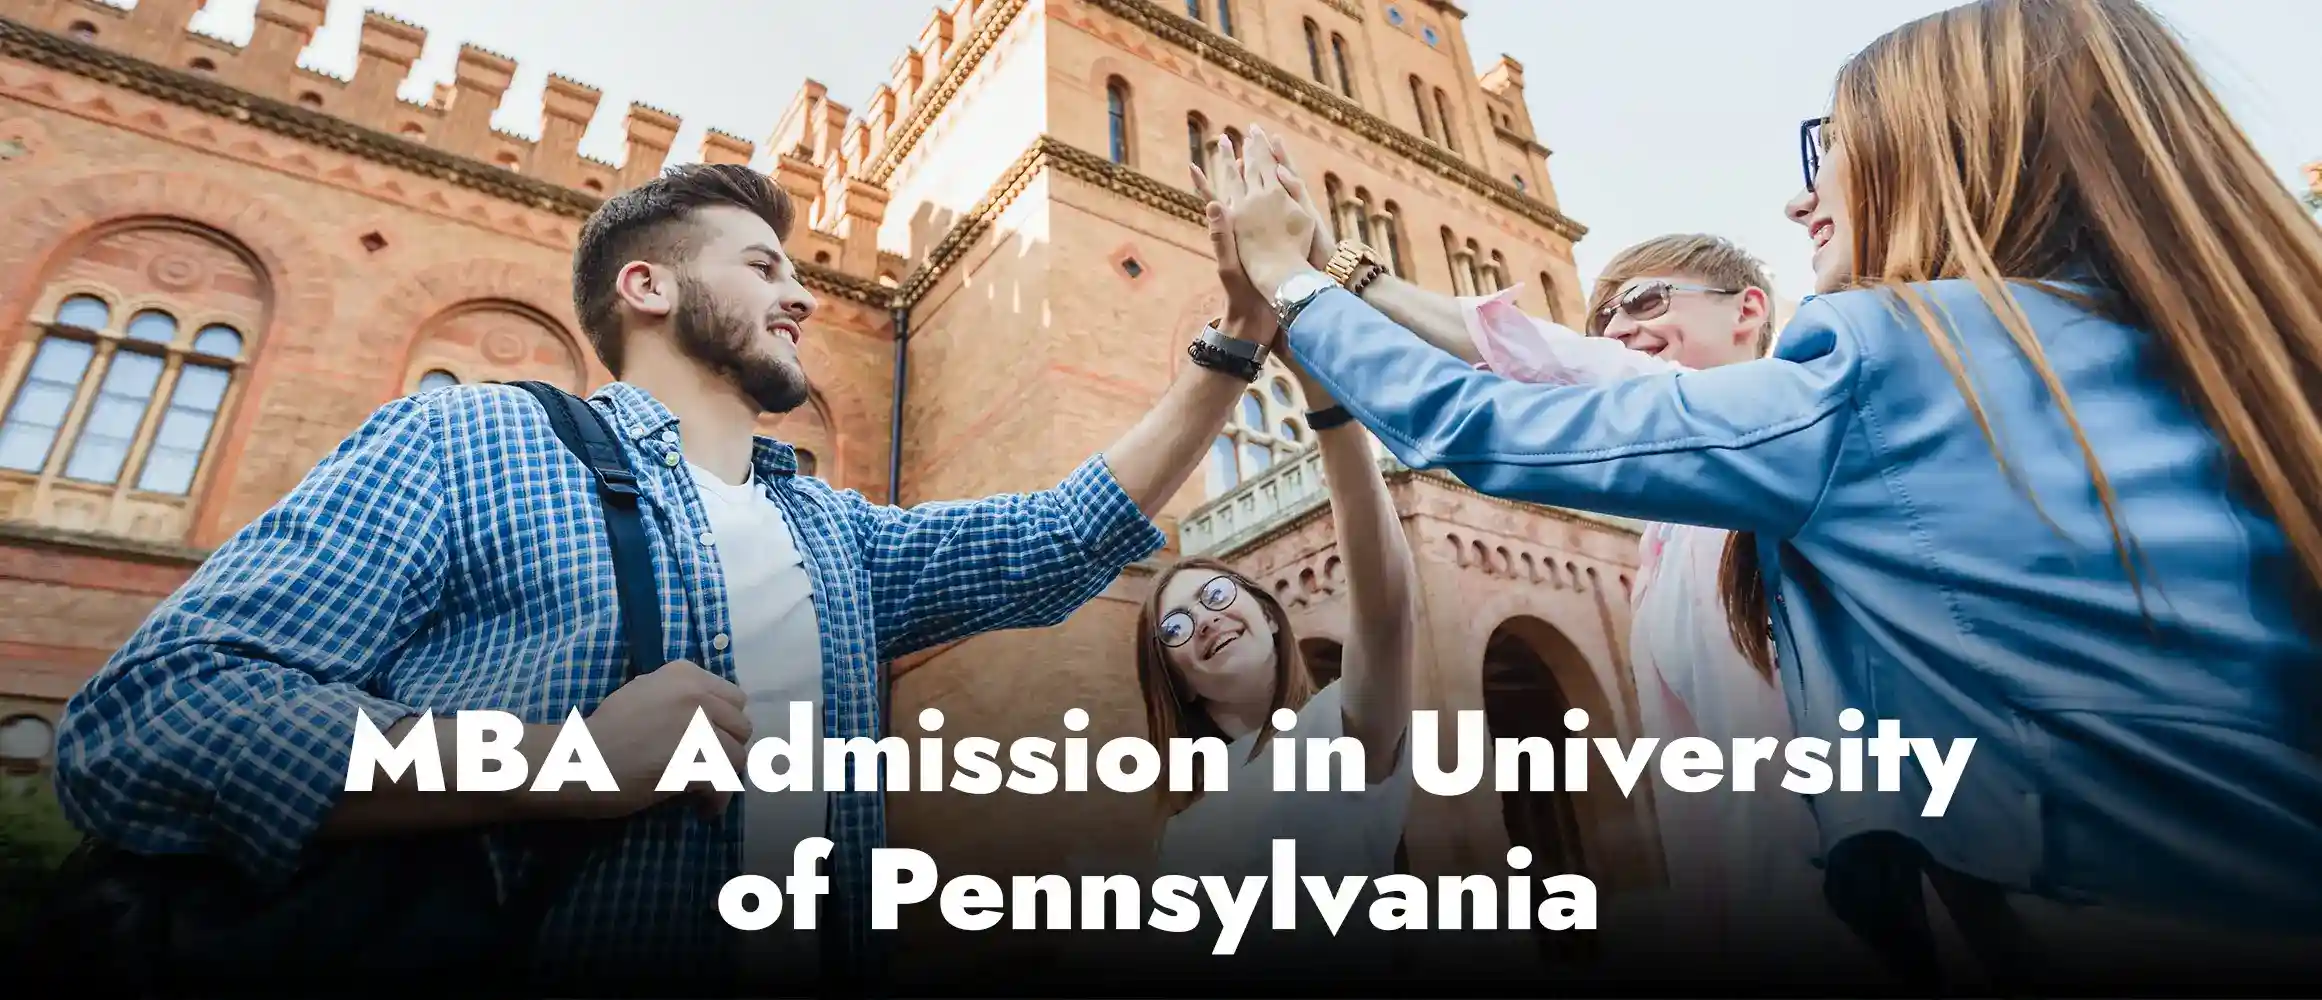 How To Apply for Admission To the University Of Pennsylvania For an MBA?